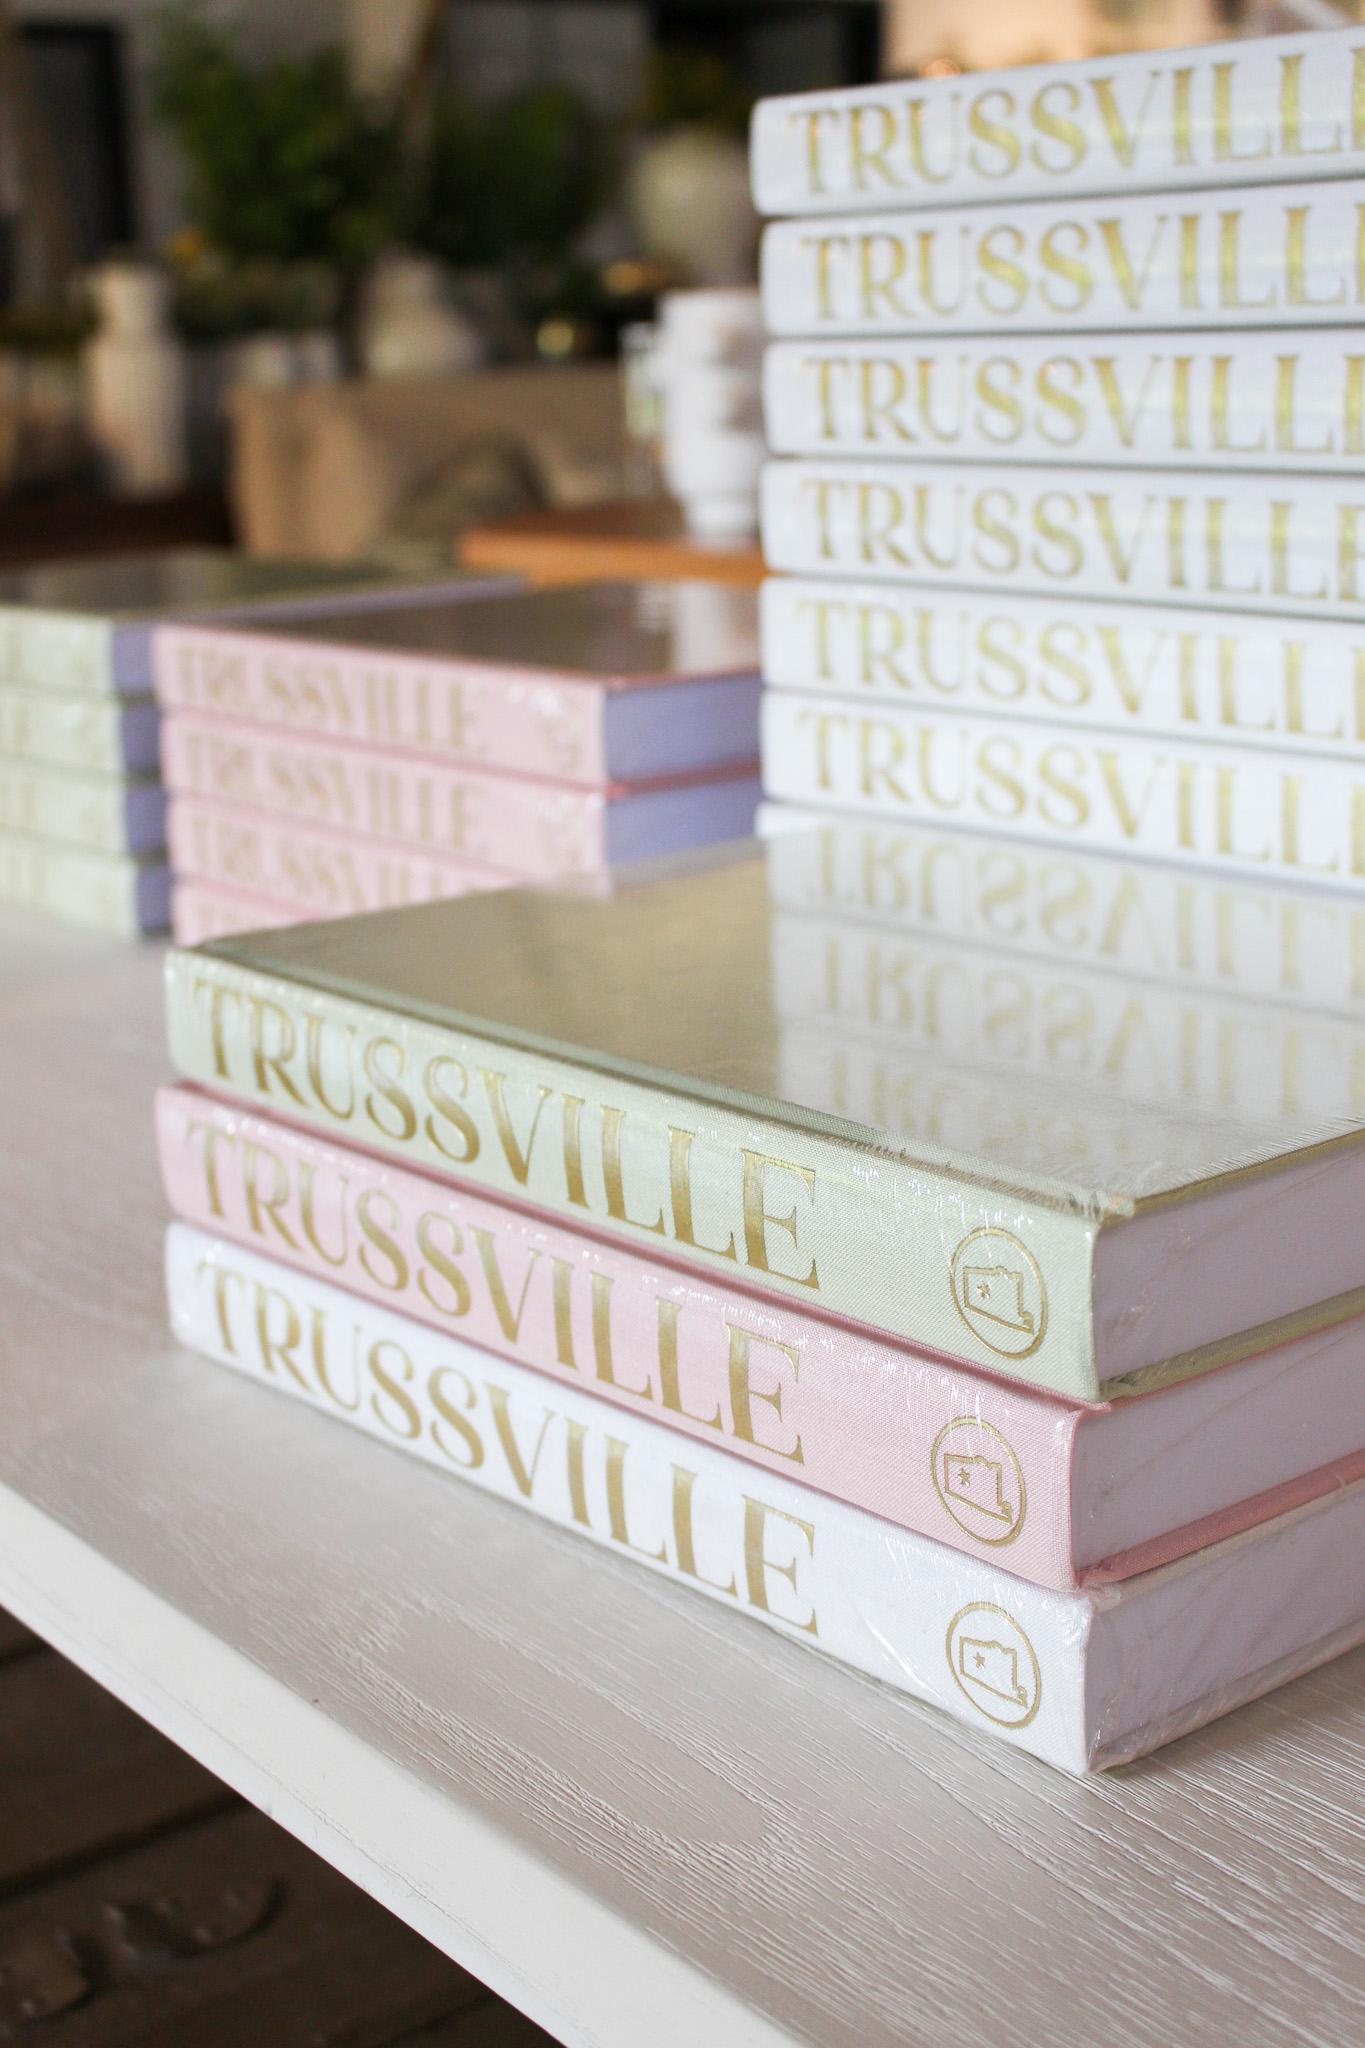 Trussville Coffee Table Book